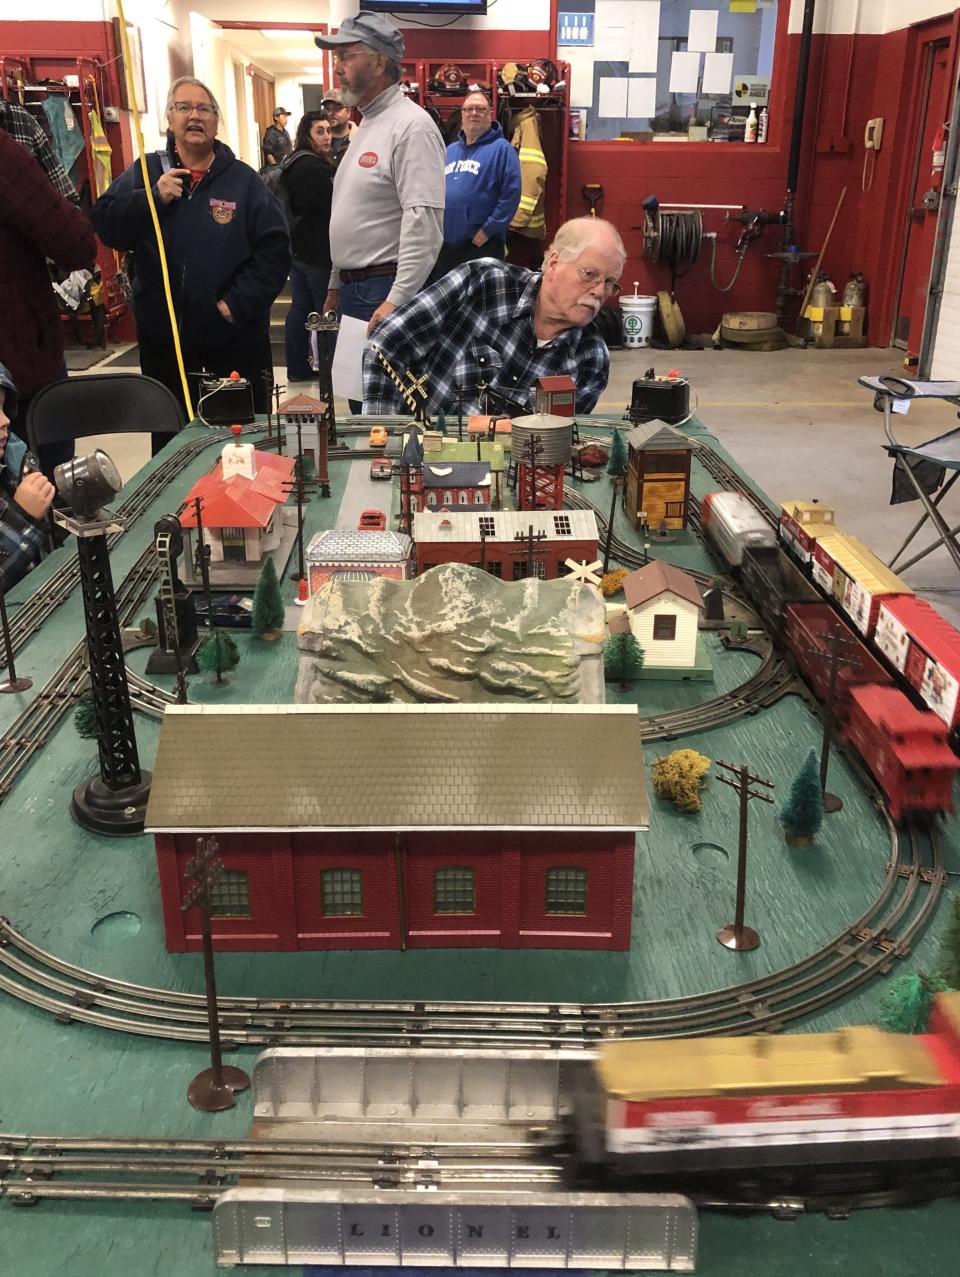 Brad Williams checks on the model train display during the Manchester Fire Department's open house on Saturday.